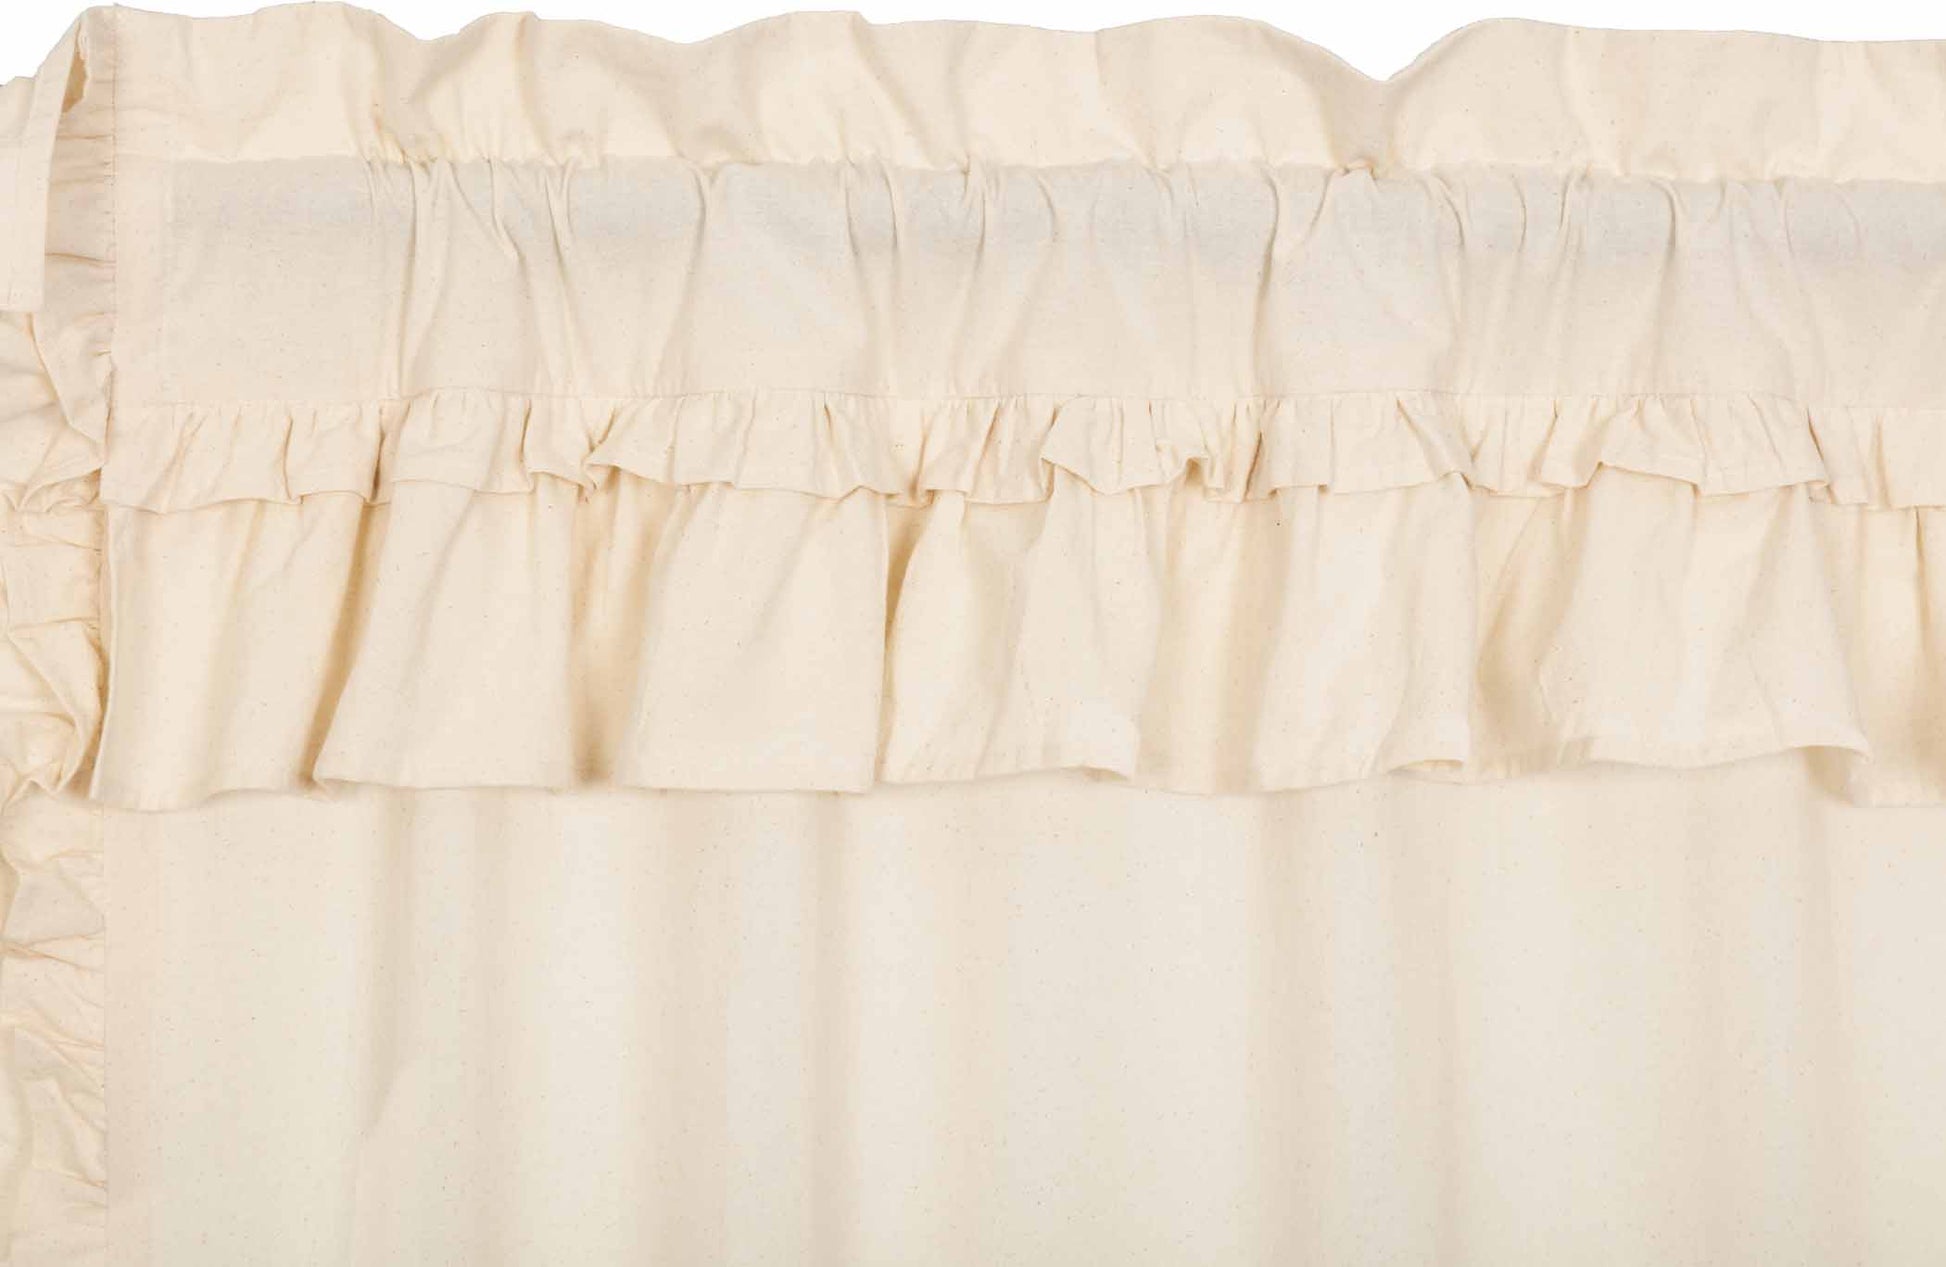 51991-Muslin-Ruffled-Unbleached-Natural-Valance-16x60-image-7